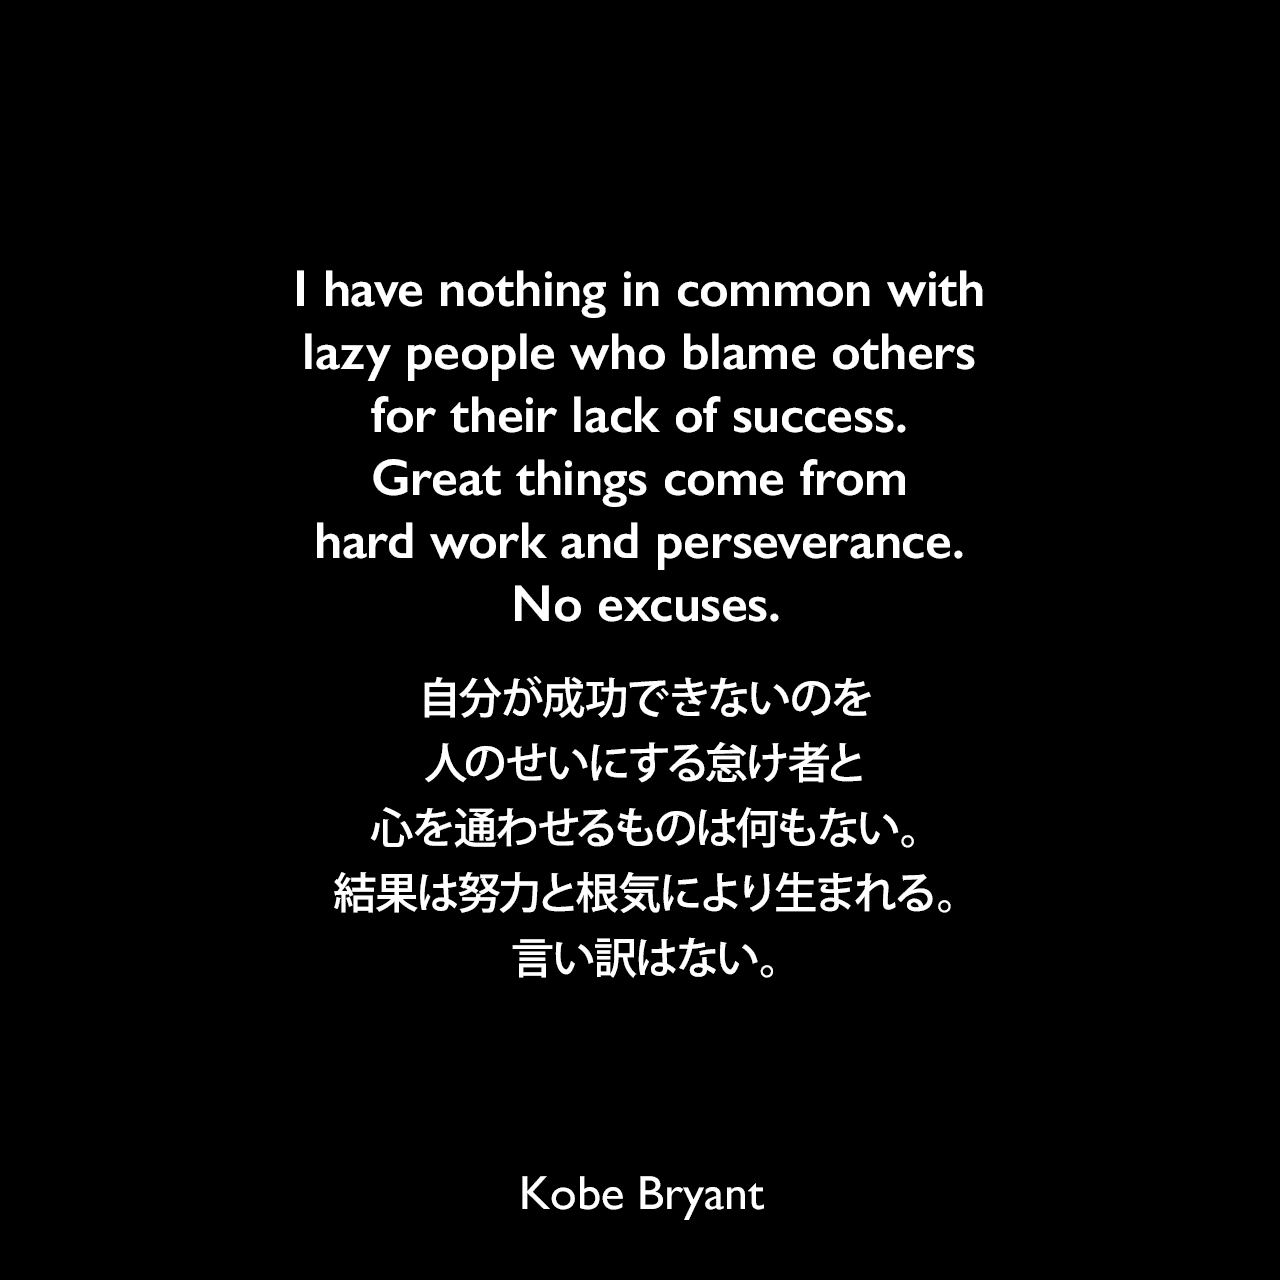 I have nothing in common with lazy people who blame others for their lack of success. Great things come from hard work and perseverance. No excuses.自分が成功できないのを人のせいにする怠け者と心を通わせるものは何もない。結果は努力と根気により生まれる。言い訳はない。